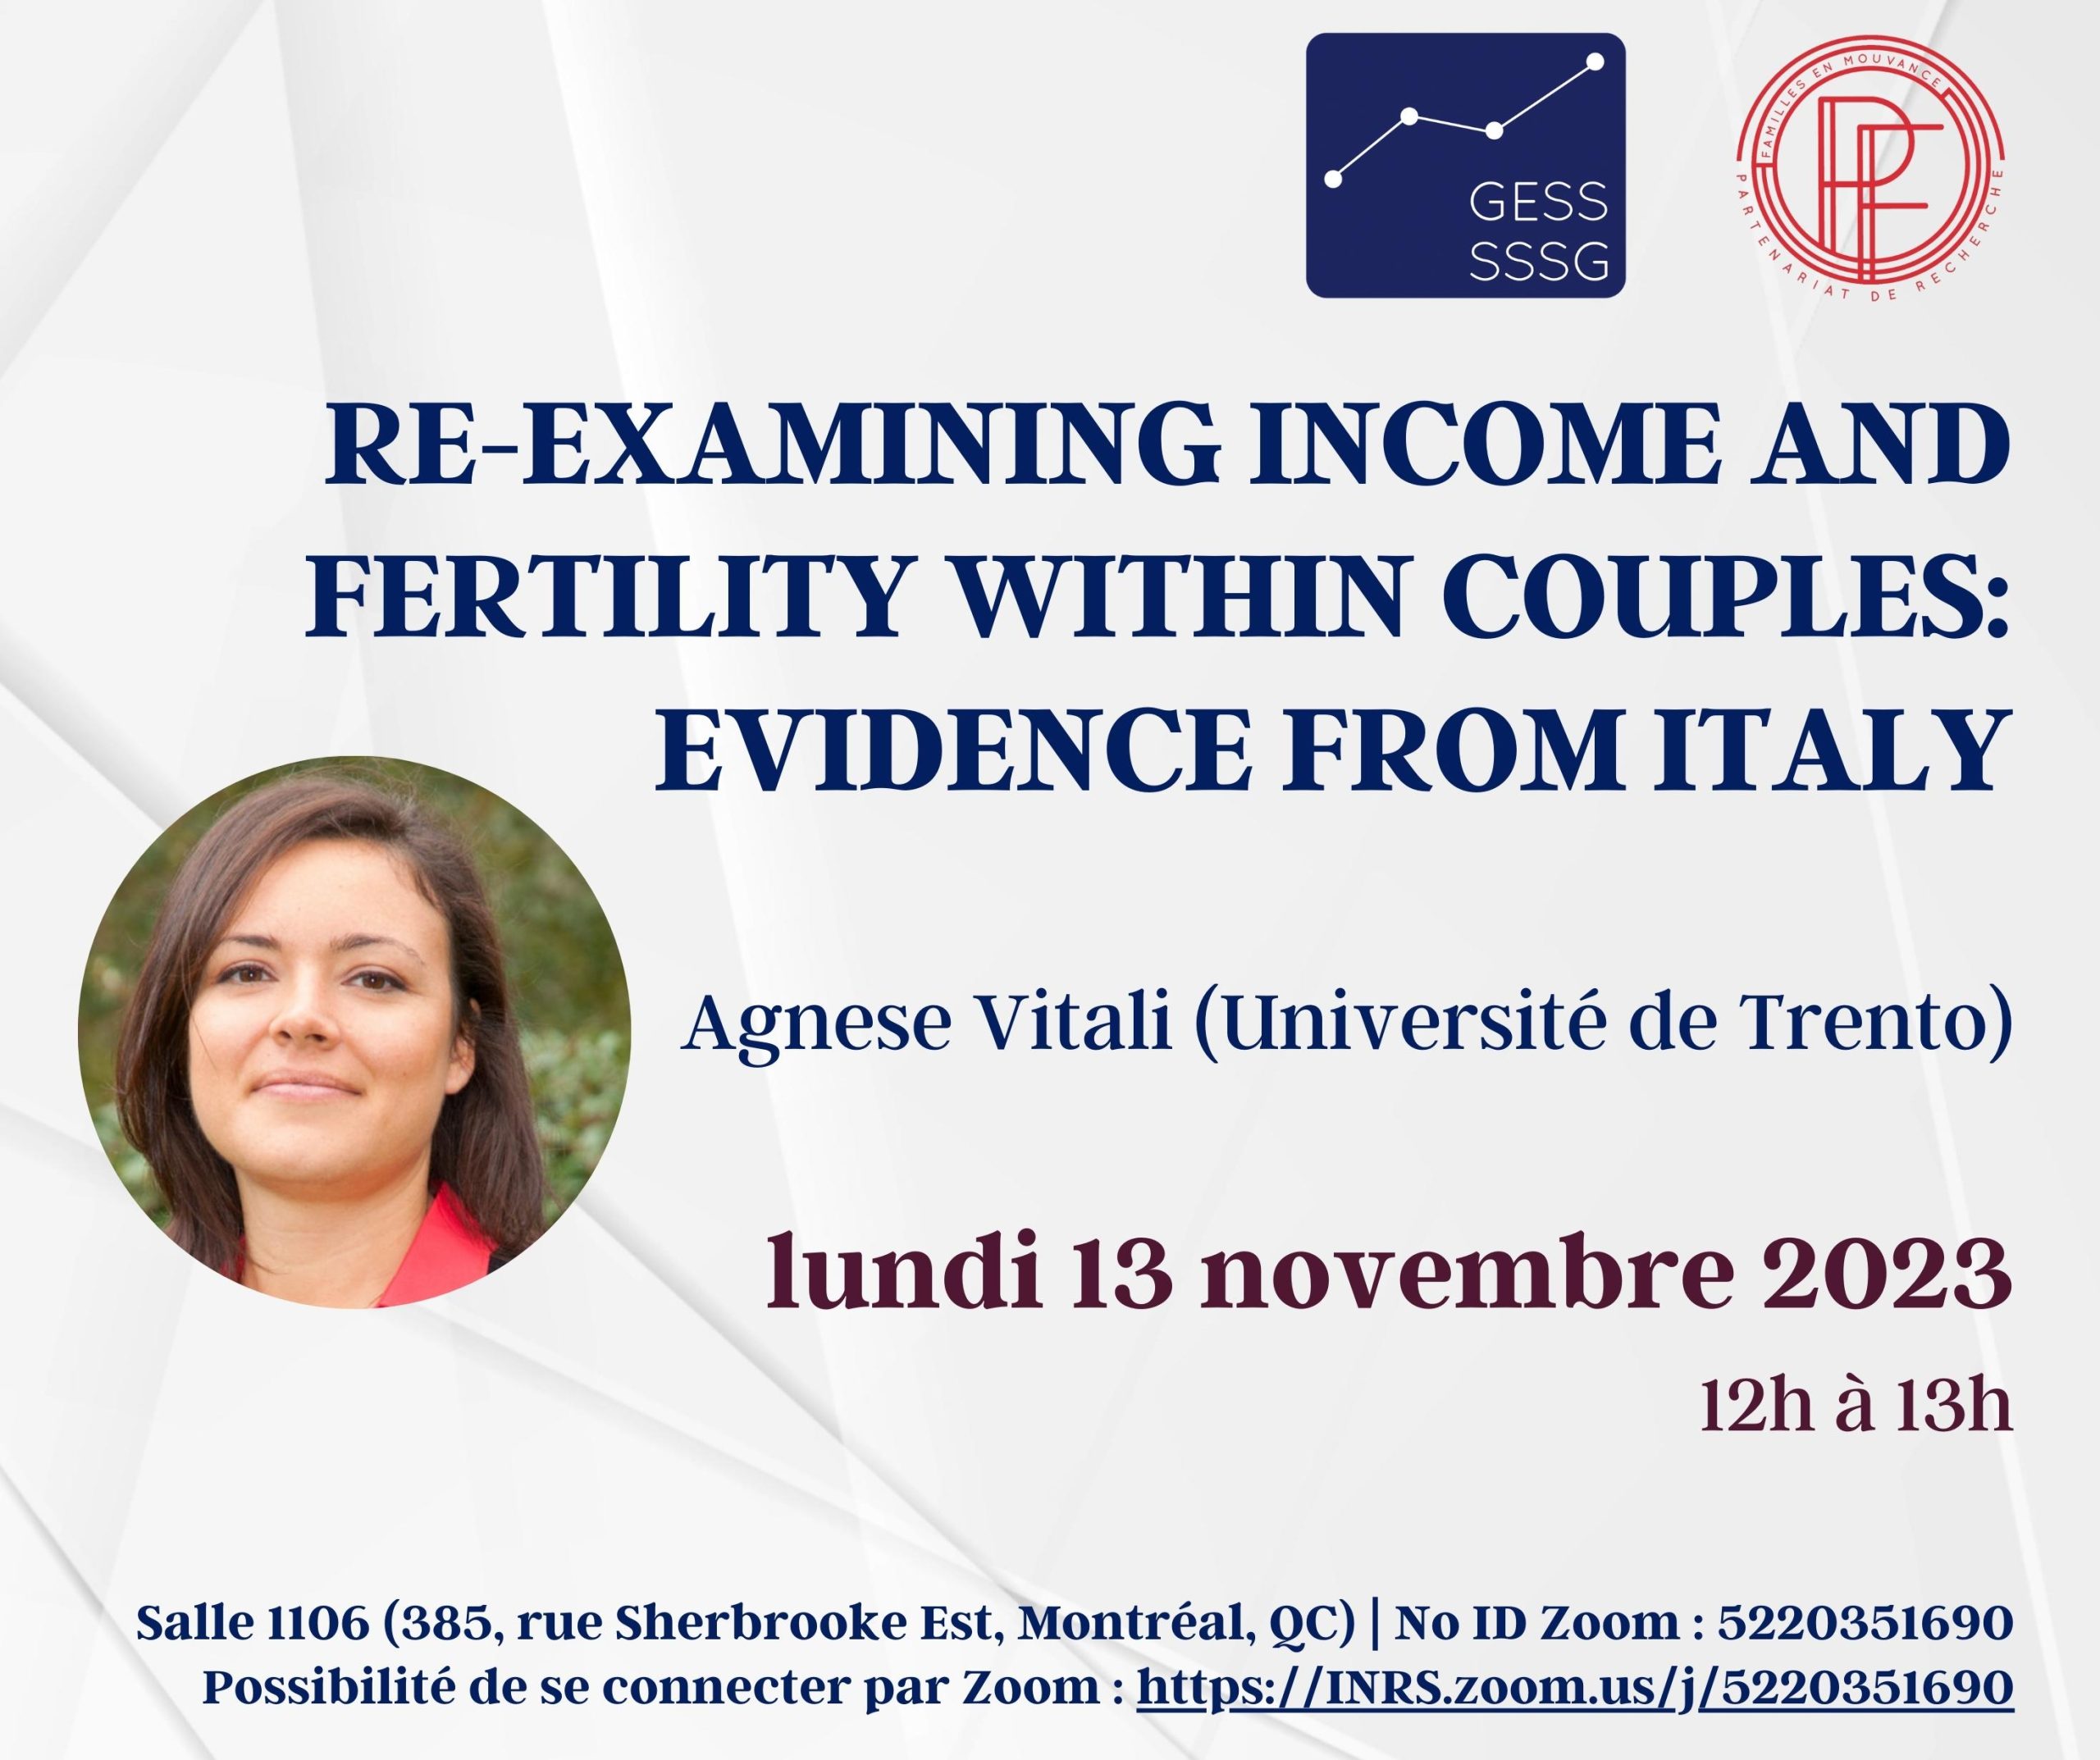 Re-examining income and fertility within couples: evidence from Italy